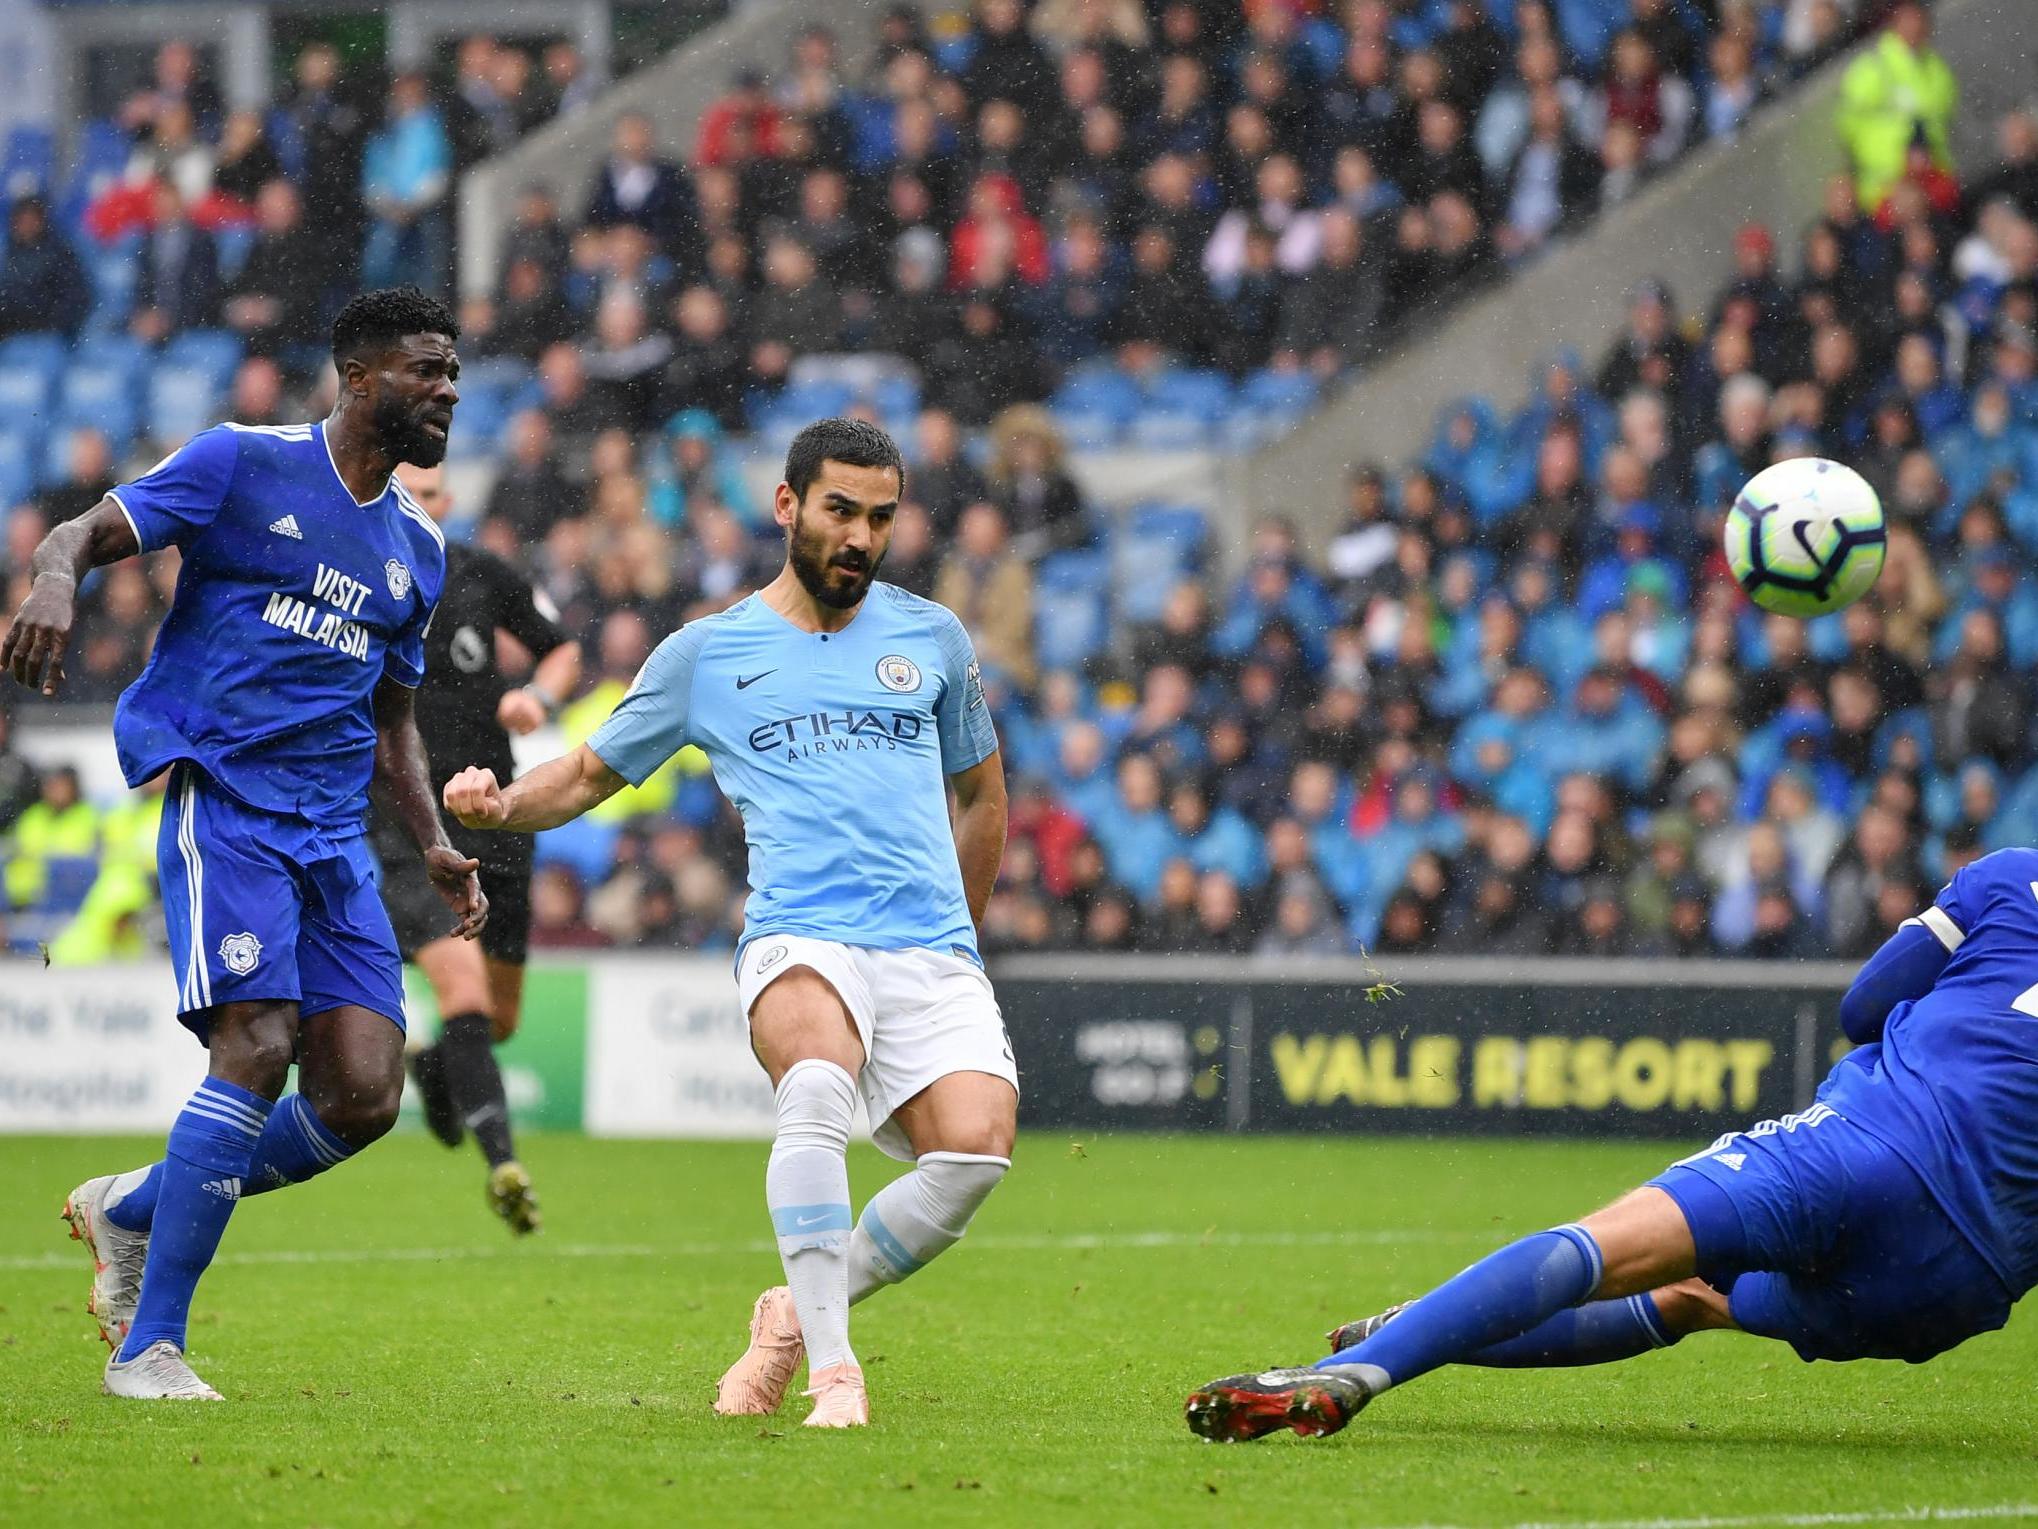 Ilkay Gundogan put in a magical performance for City in south Wales